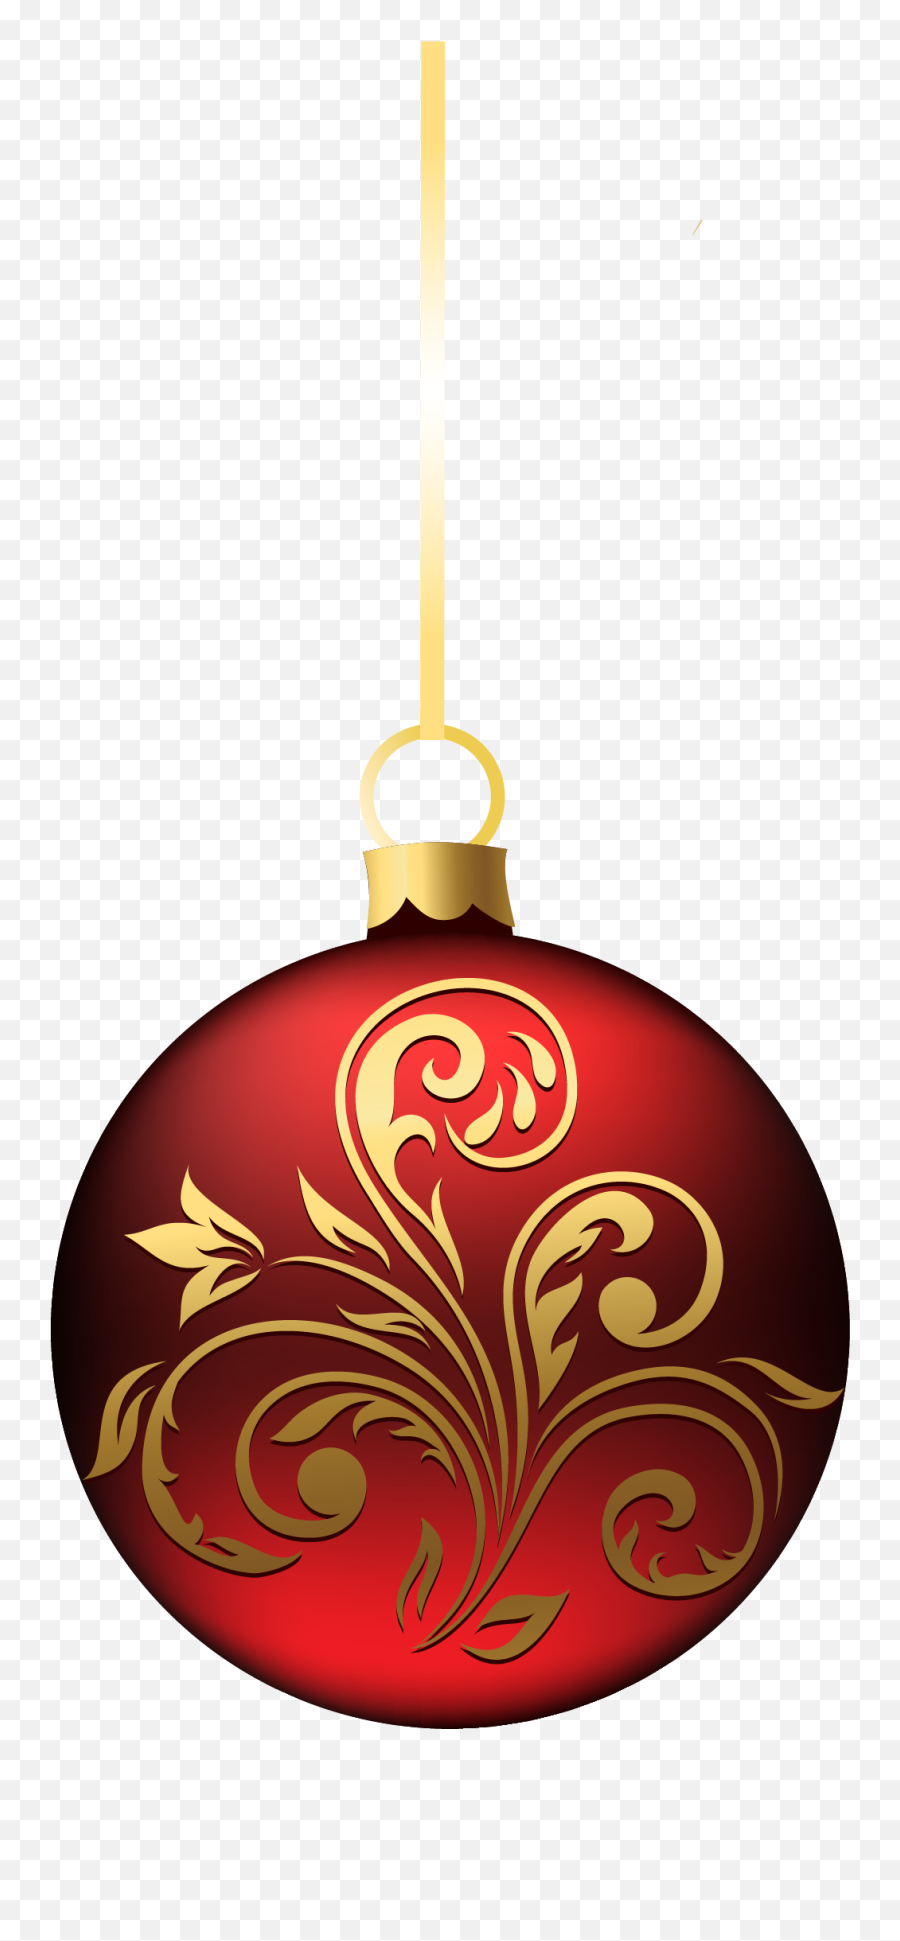 15 Awesome Christmas Bulb Ornament Clipart - Christmas Christmas Ball Ornament Png Emoji,Christmas Ornament Clipart